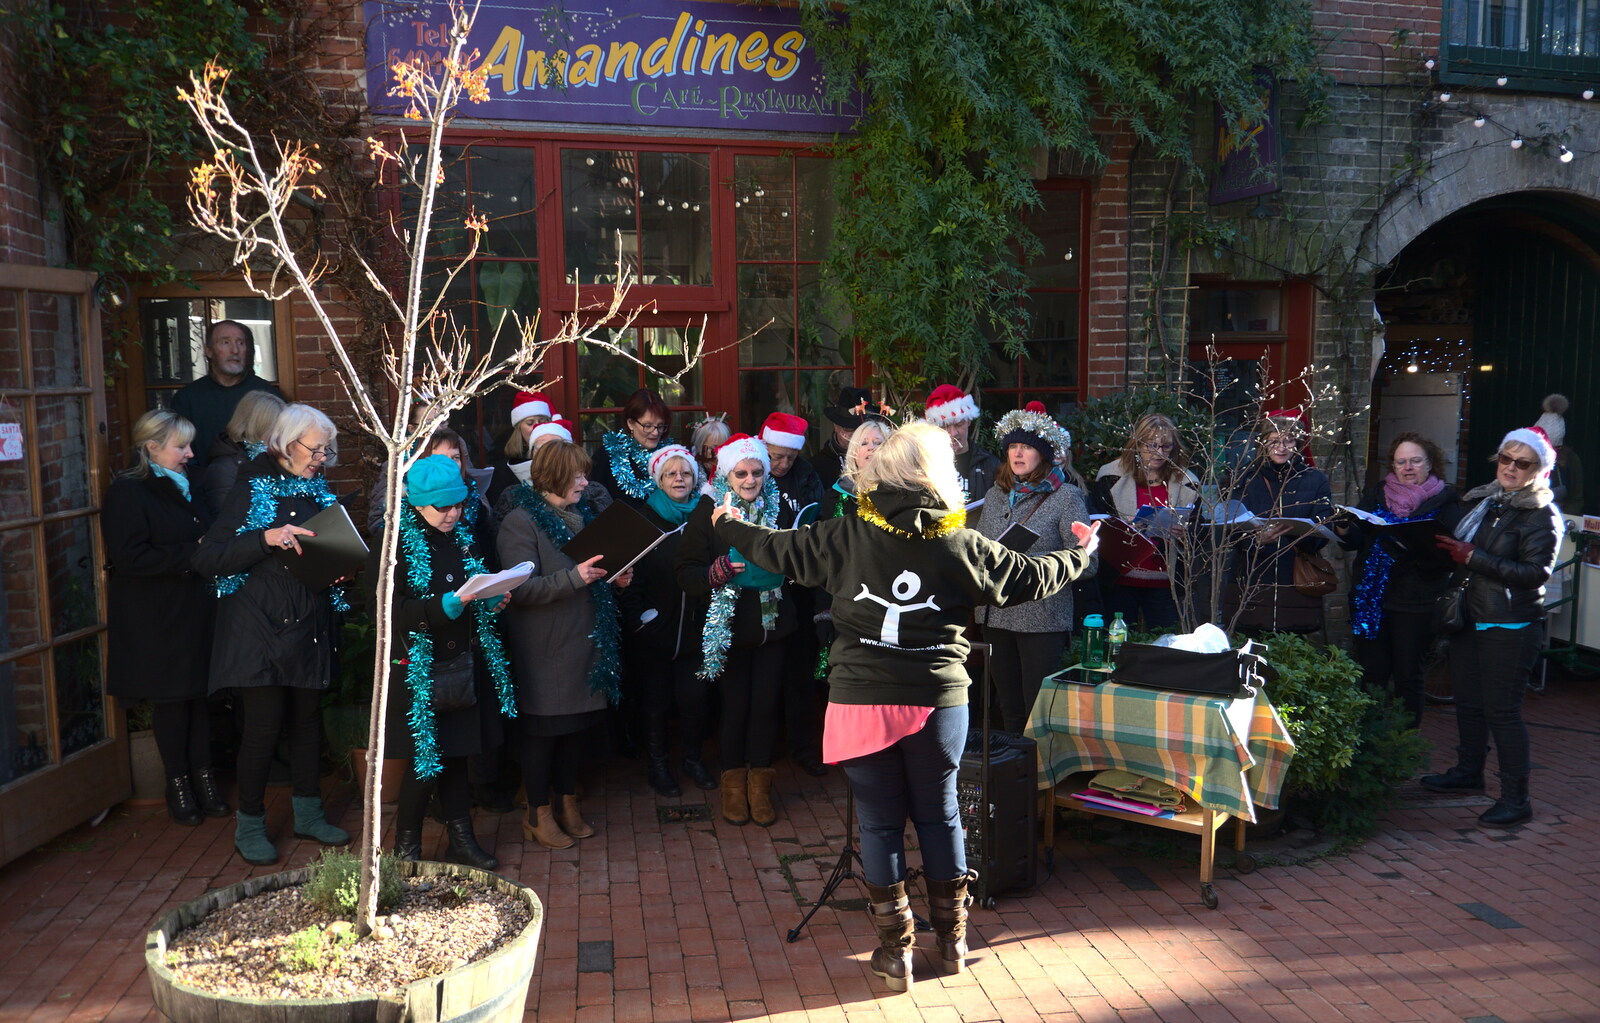 The choir does its singing thing from The St. Nicholas Street Fayre, Diss, Norfolk - 9th December 2018